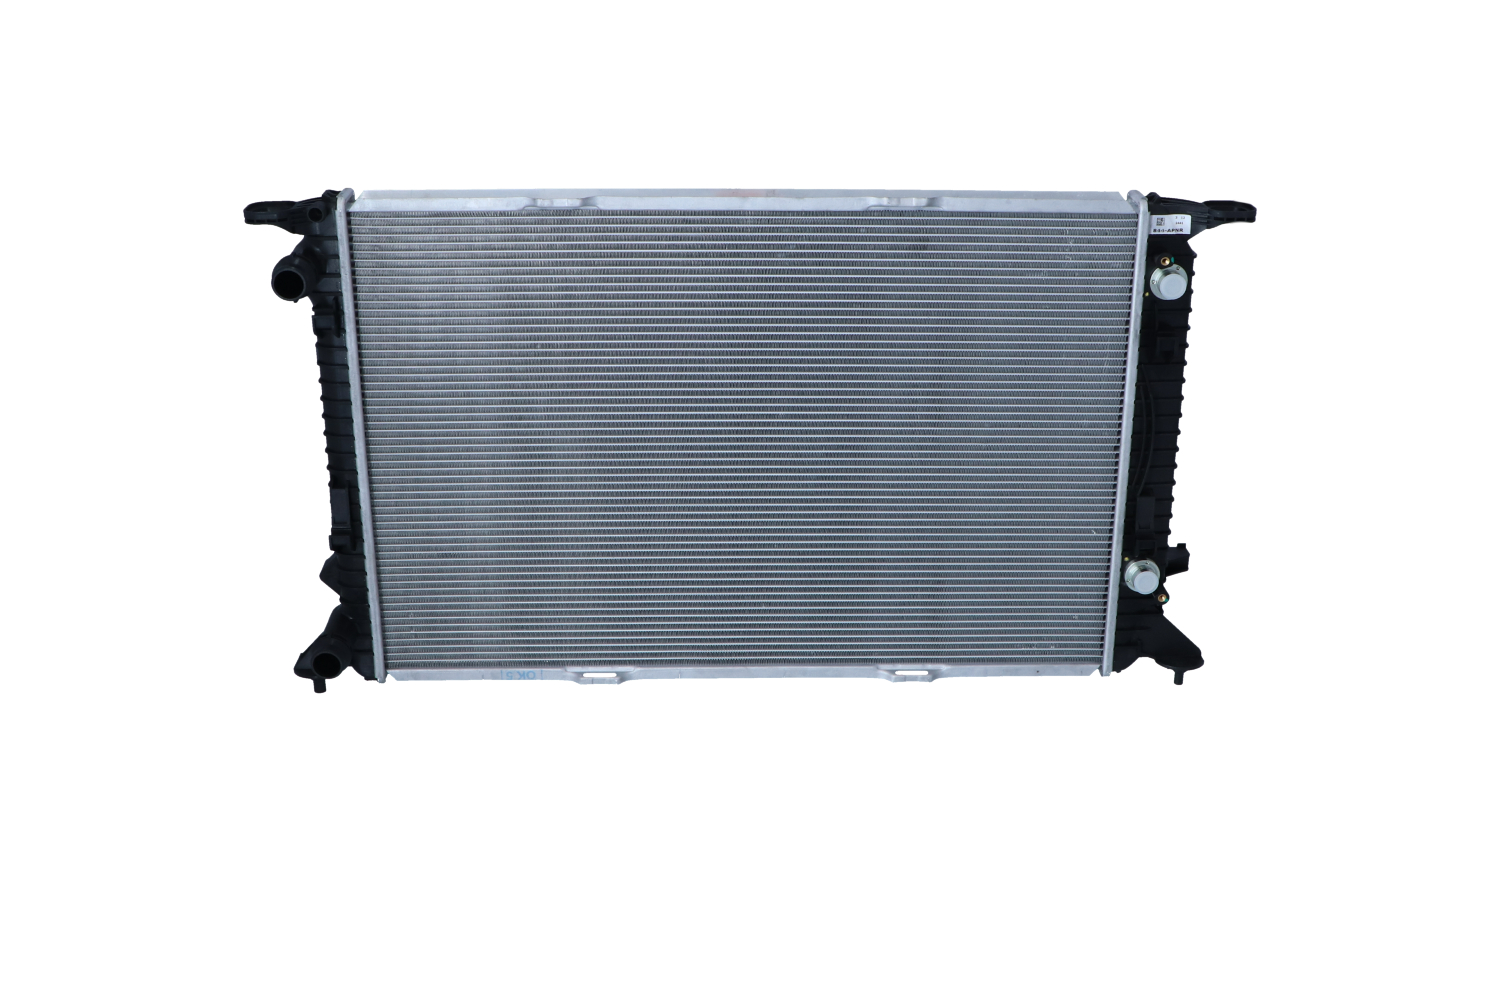 NRF EASY FIT 53718 Engine radiator Aluminium, 720 x 466 x 27 mm, with seal ring, Brazed cooling fins